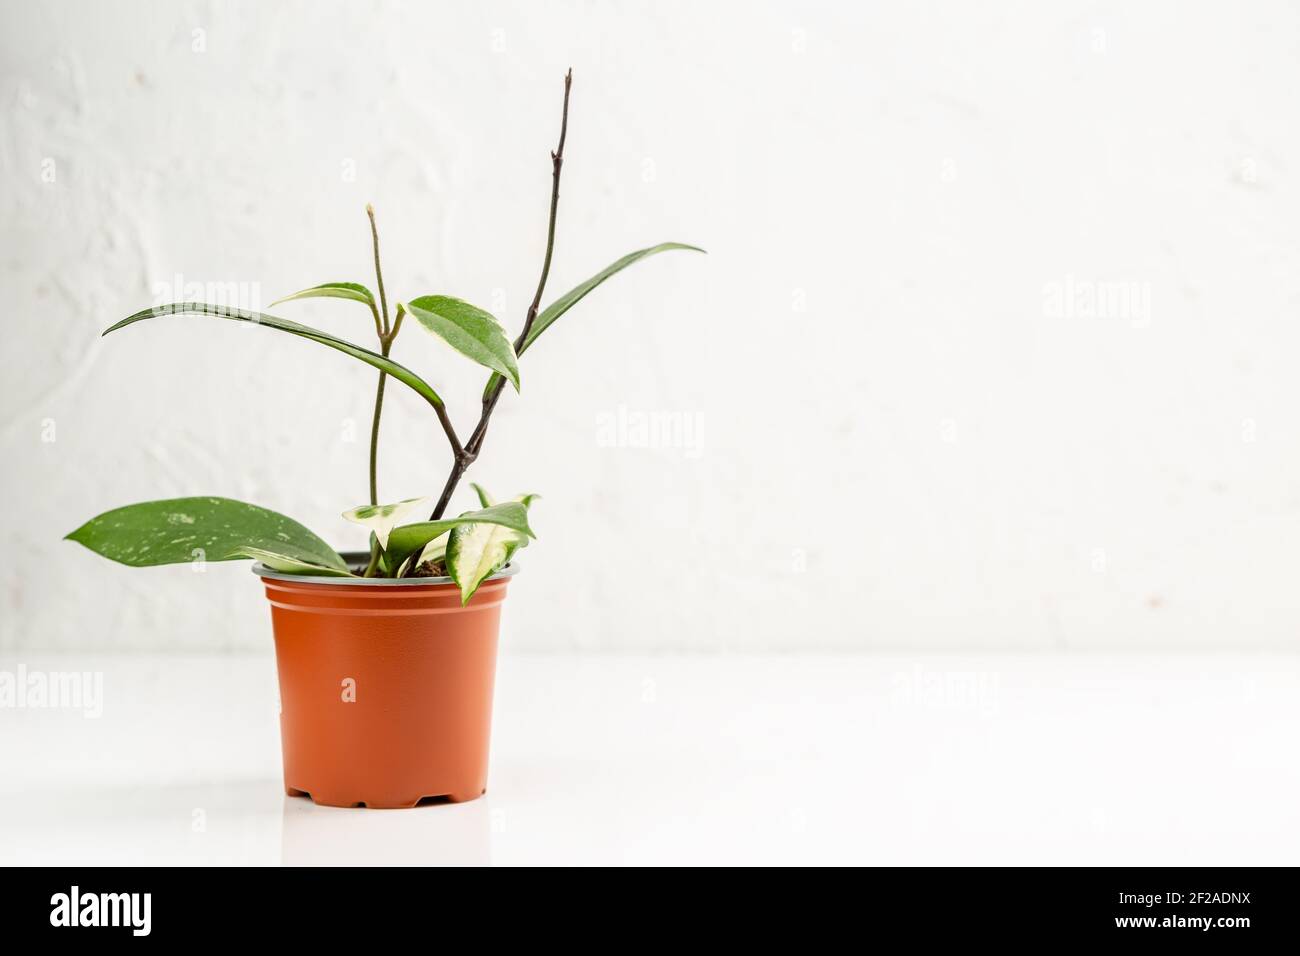 Hoya plant in the nursery pot over white wall, Urban jungle houseplant, copy space for text Stock Photo